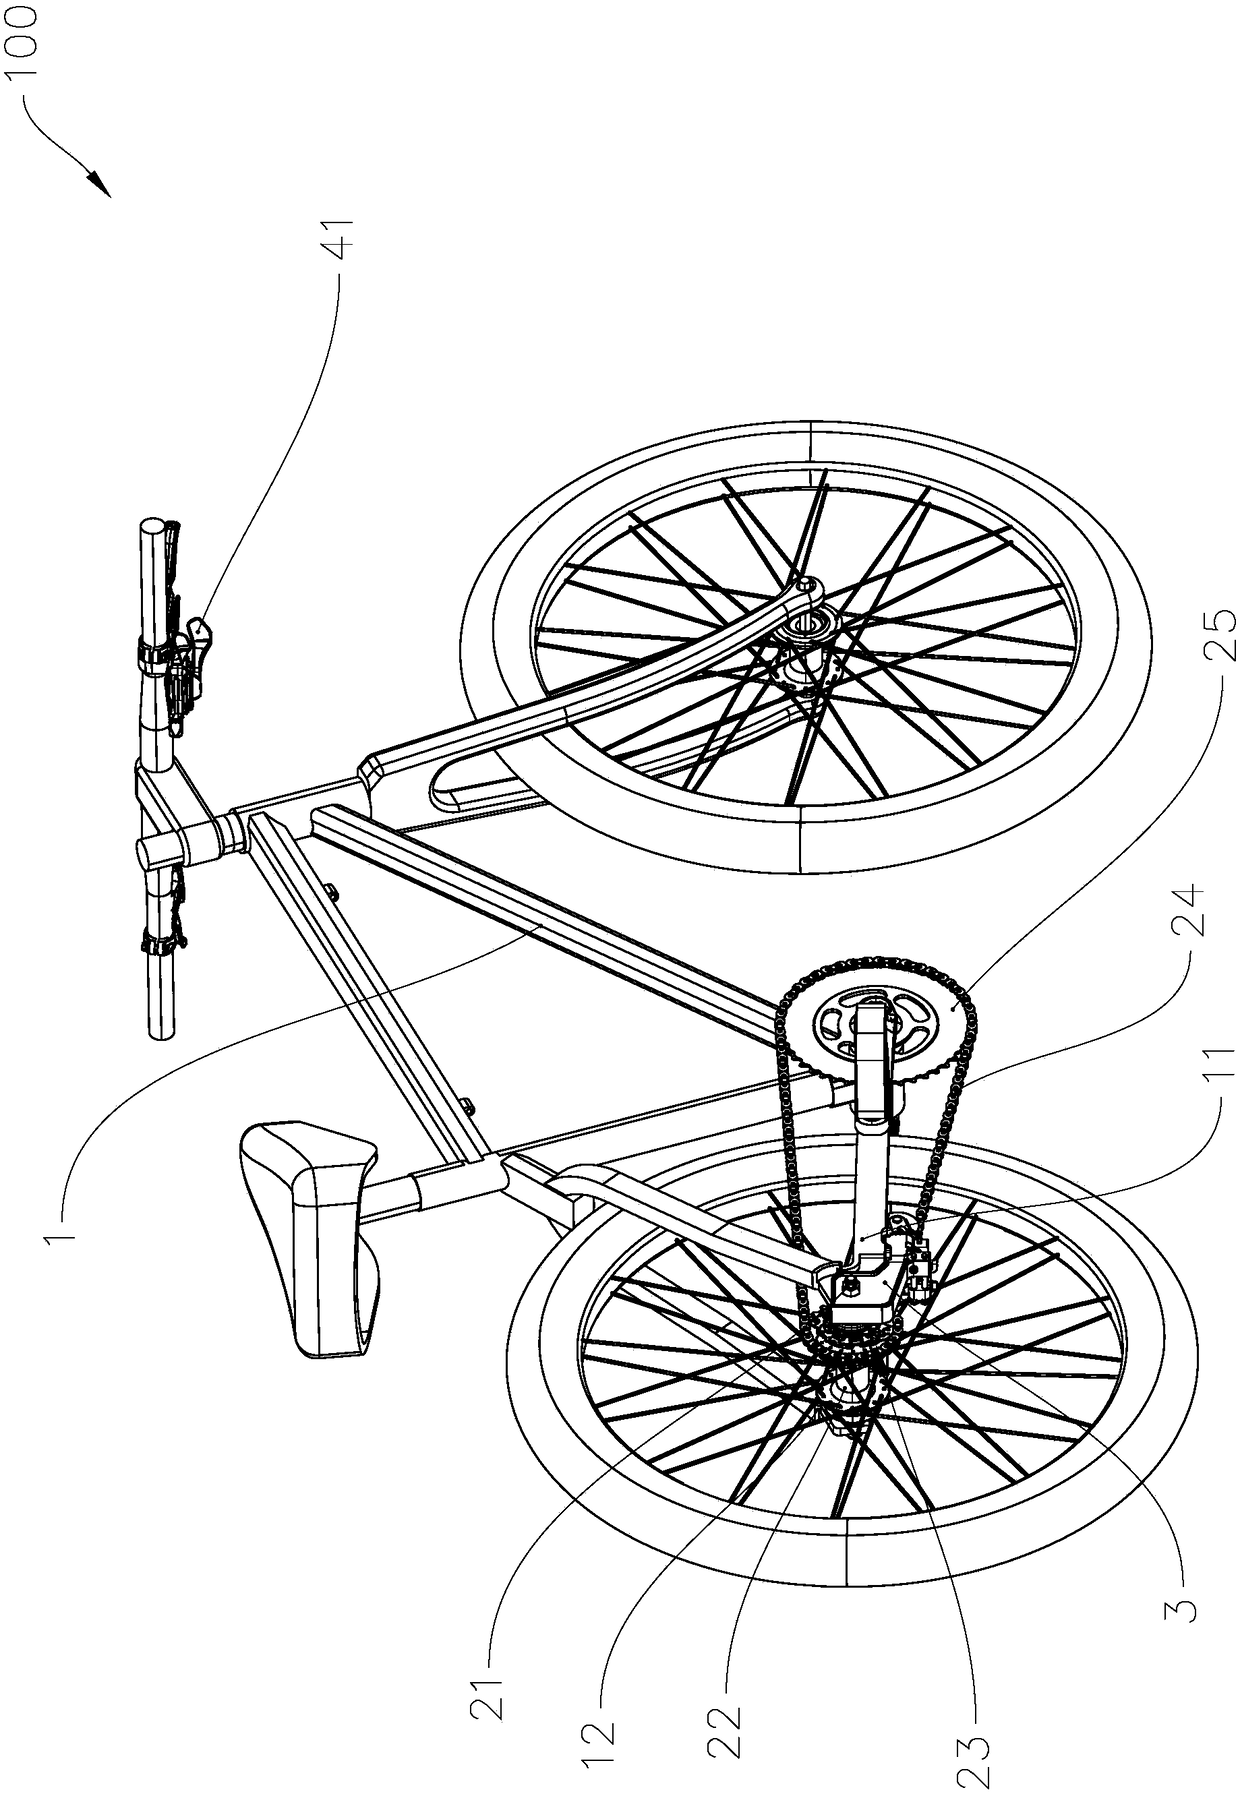 Bicycle chain shifting structure and bicycle